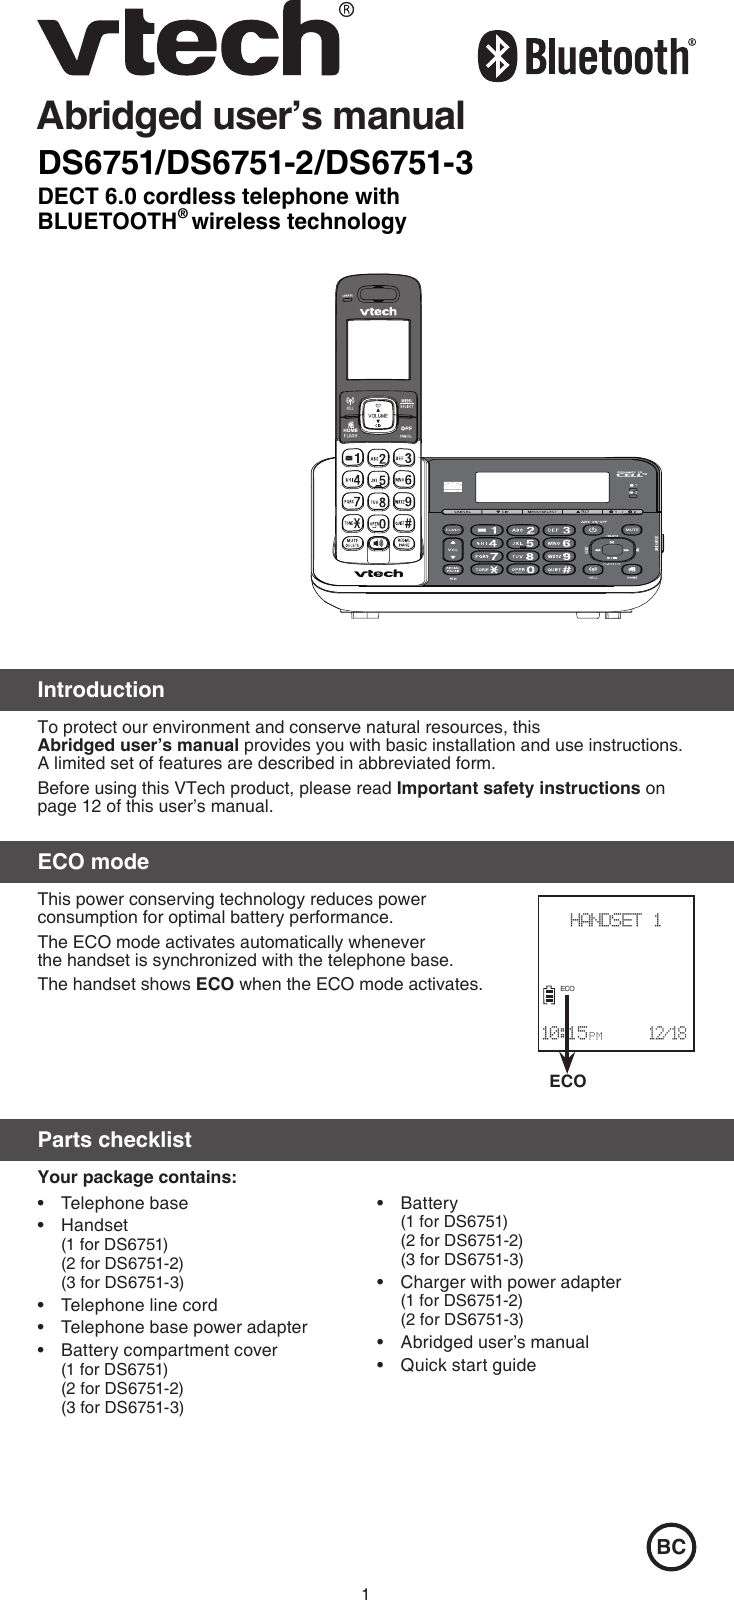 1DS6751/DS6751-2/DS6751-3DECT 6.0 cordless telephone with BLUETOOTH® wireless technologyAbridged user’s manualIntroductionTo protect our environment and conserve natural resources, this  Abridged user’s manual provides you with basic installation and use instructions. A limited set of features are described in abbreviated form.Before using this VTech product, please read Important safety instructions on page 12 of this user’s manual.ECO modeThis power conserving technology reduces power  consumption for optimal battery performance. The ECO mode activates automatically whenever  the handset is synchronized with the telephone base. The handset shows ECO when the ECO mode activates.Parts checklistYour package contains:BCTelephone baseHandset  (1 for DS6751) (2 for DS6751-2) (3 for DS6751-3)Telephone line cordTelephone base power adapterBattery compartment cover (1 for DS6751) (2 for DS6751-2) (3 for DS6751-3) •••••Battery (1 for DS6751) (2 for DS6751-2) (3 for DS6751-3)Charger with power adapter (1 for DS6751-2) (2 for DS6751-3)Abridged user’s manualQuick start guide••••ECOHANDSET 1                      10:15 P M      12/18ECO